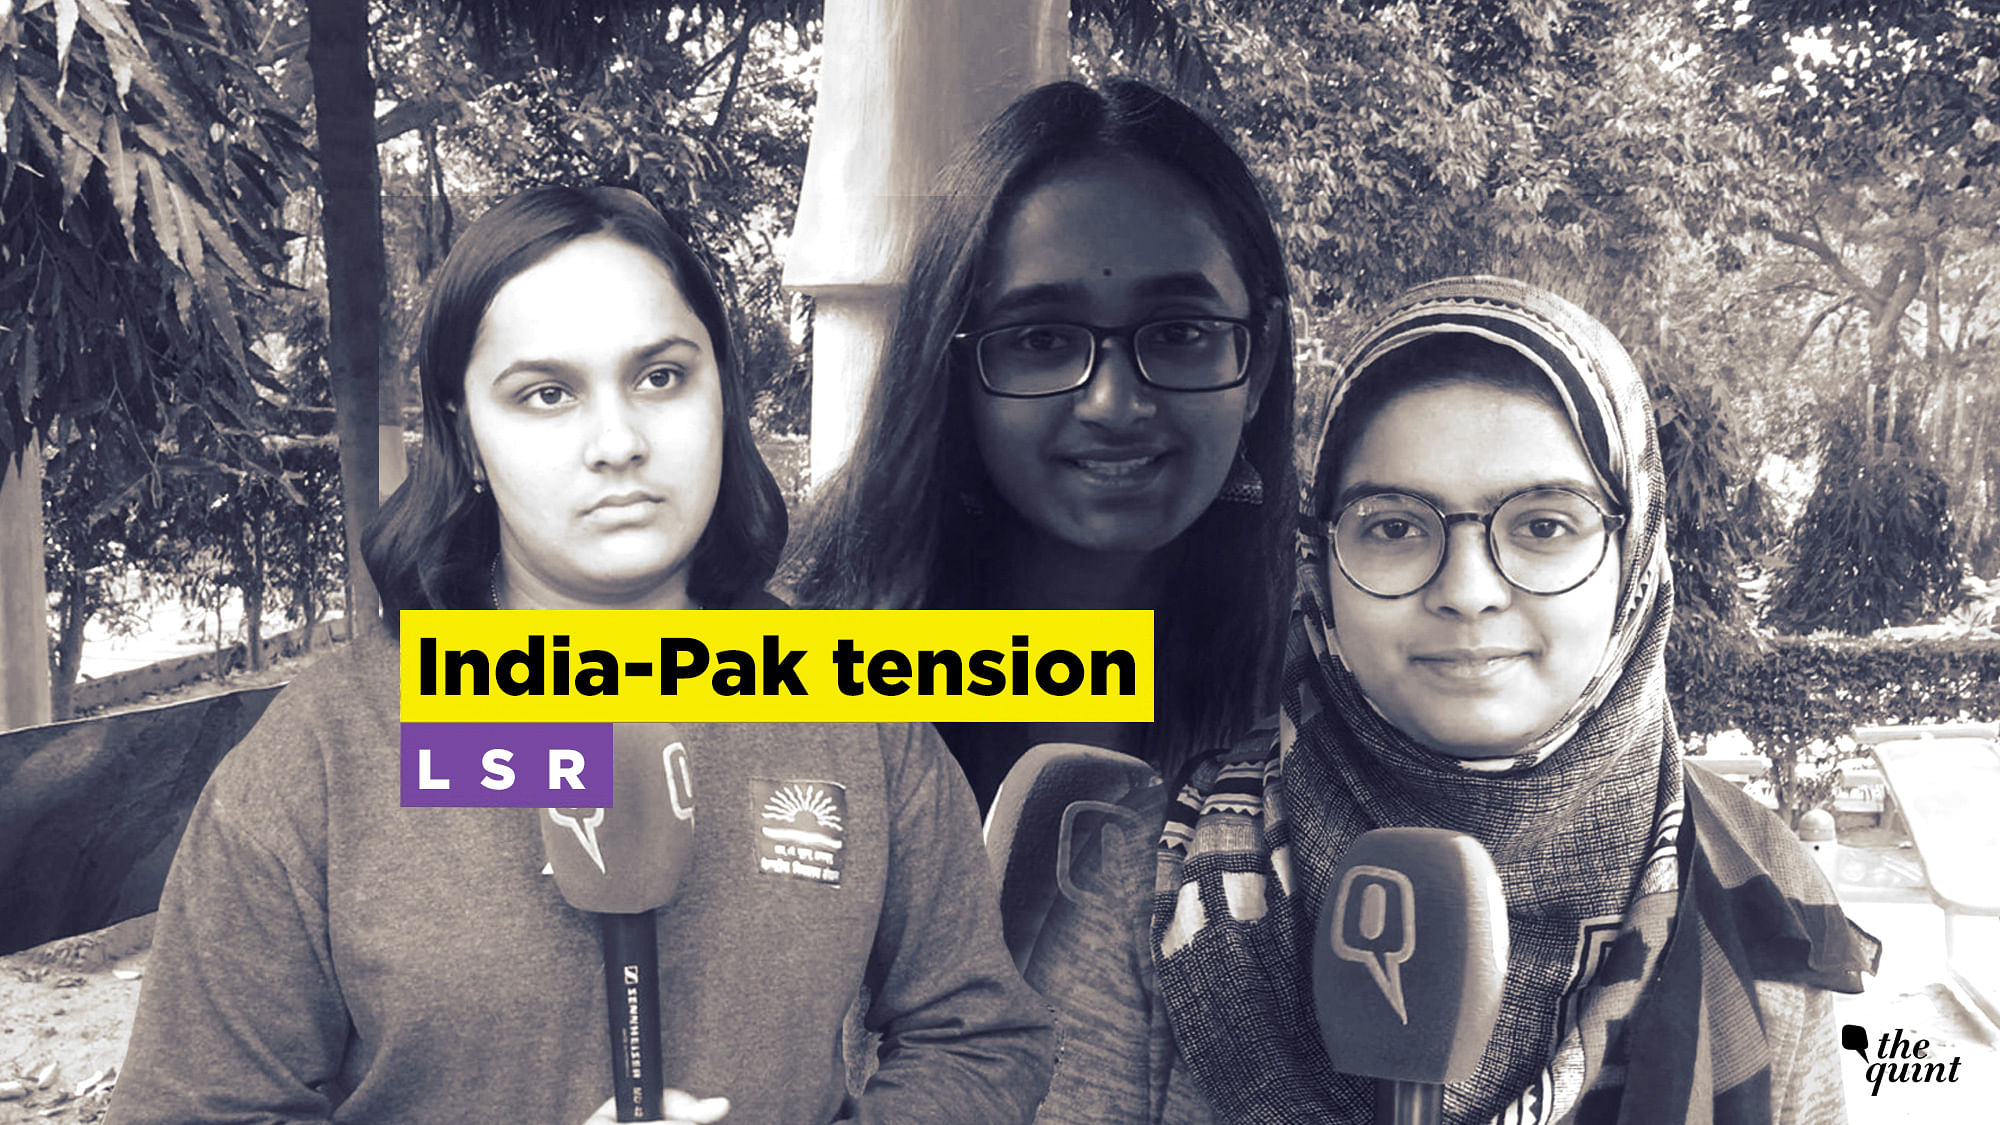 Students from Lady Shri Ram College, Delhi University, weighed in on the Indo-Pak situation.